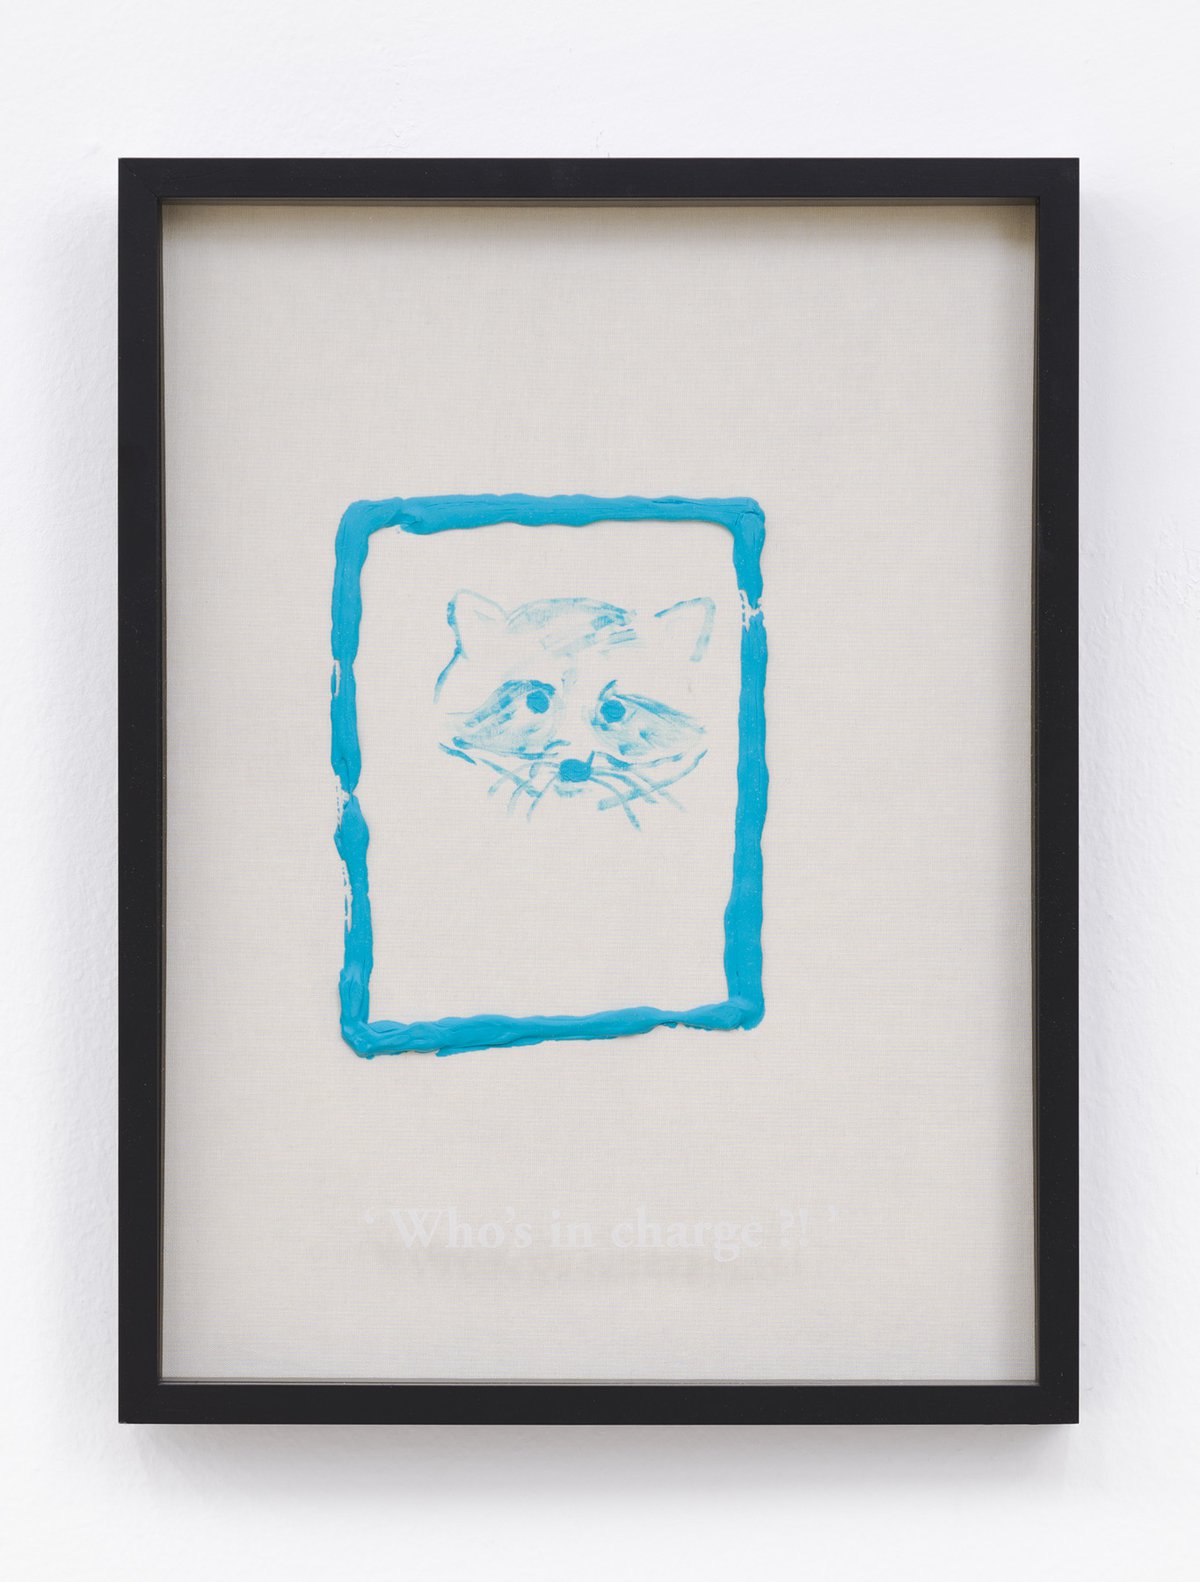 Philipp Timischl&quot;Who&#x27;s in charge?!&quot; (Beige/Cobalt Turquoise), 2017Acrylic on linen and glass-engraved object frame40.1 x 32.1 cm